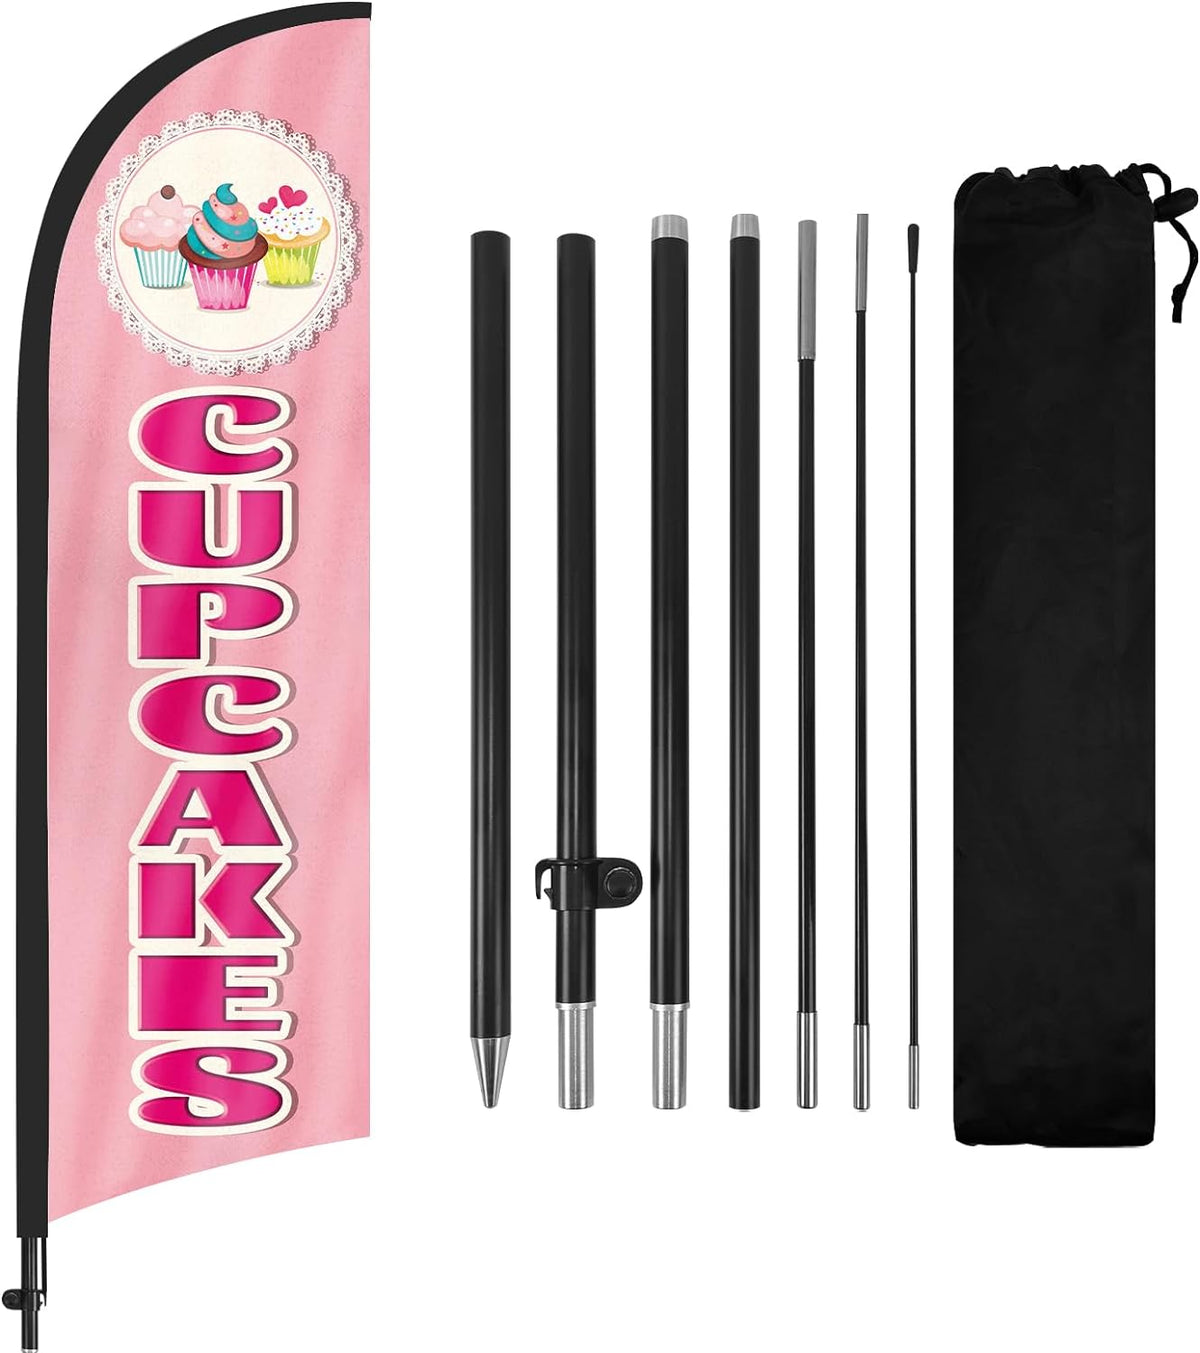 8ft Cupcakes Feather Flag Kit - Advertising Banner with Pole and Stake